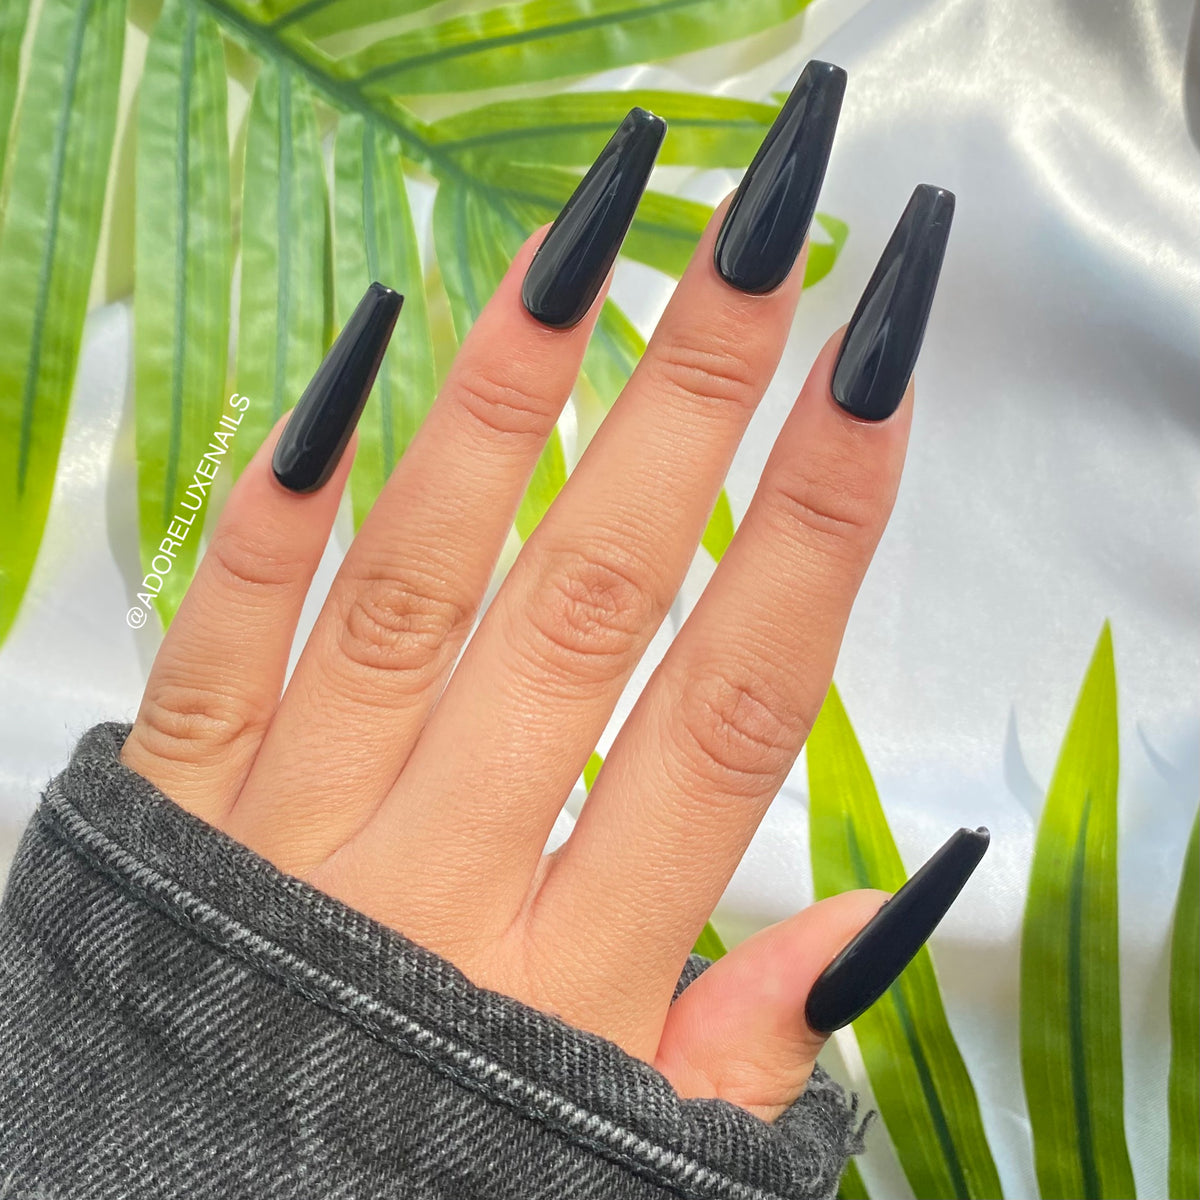 OBSIDIAN – Adore Luxe Nails